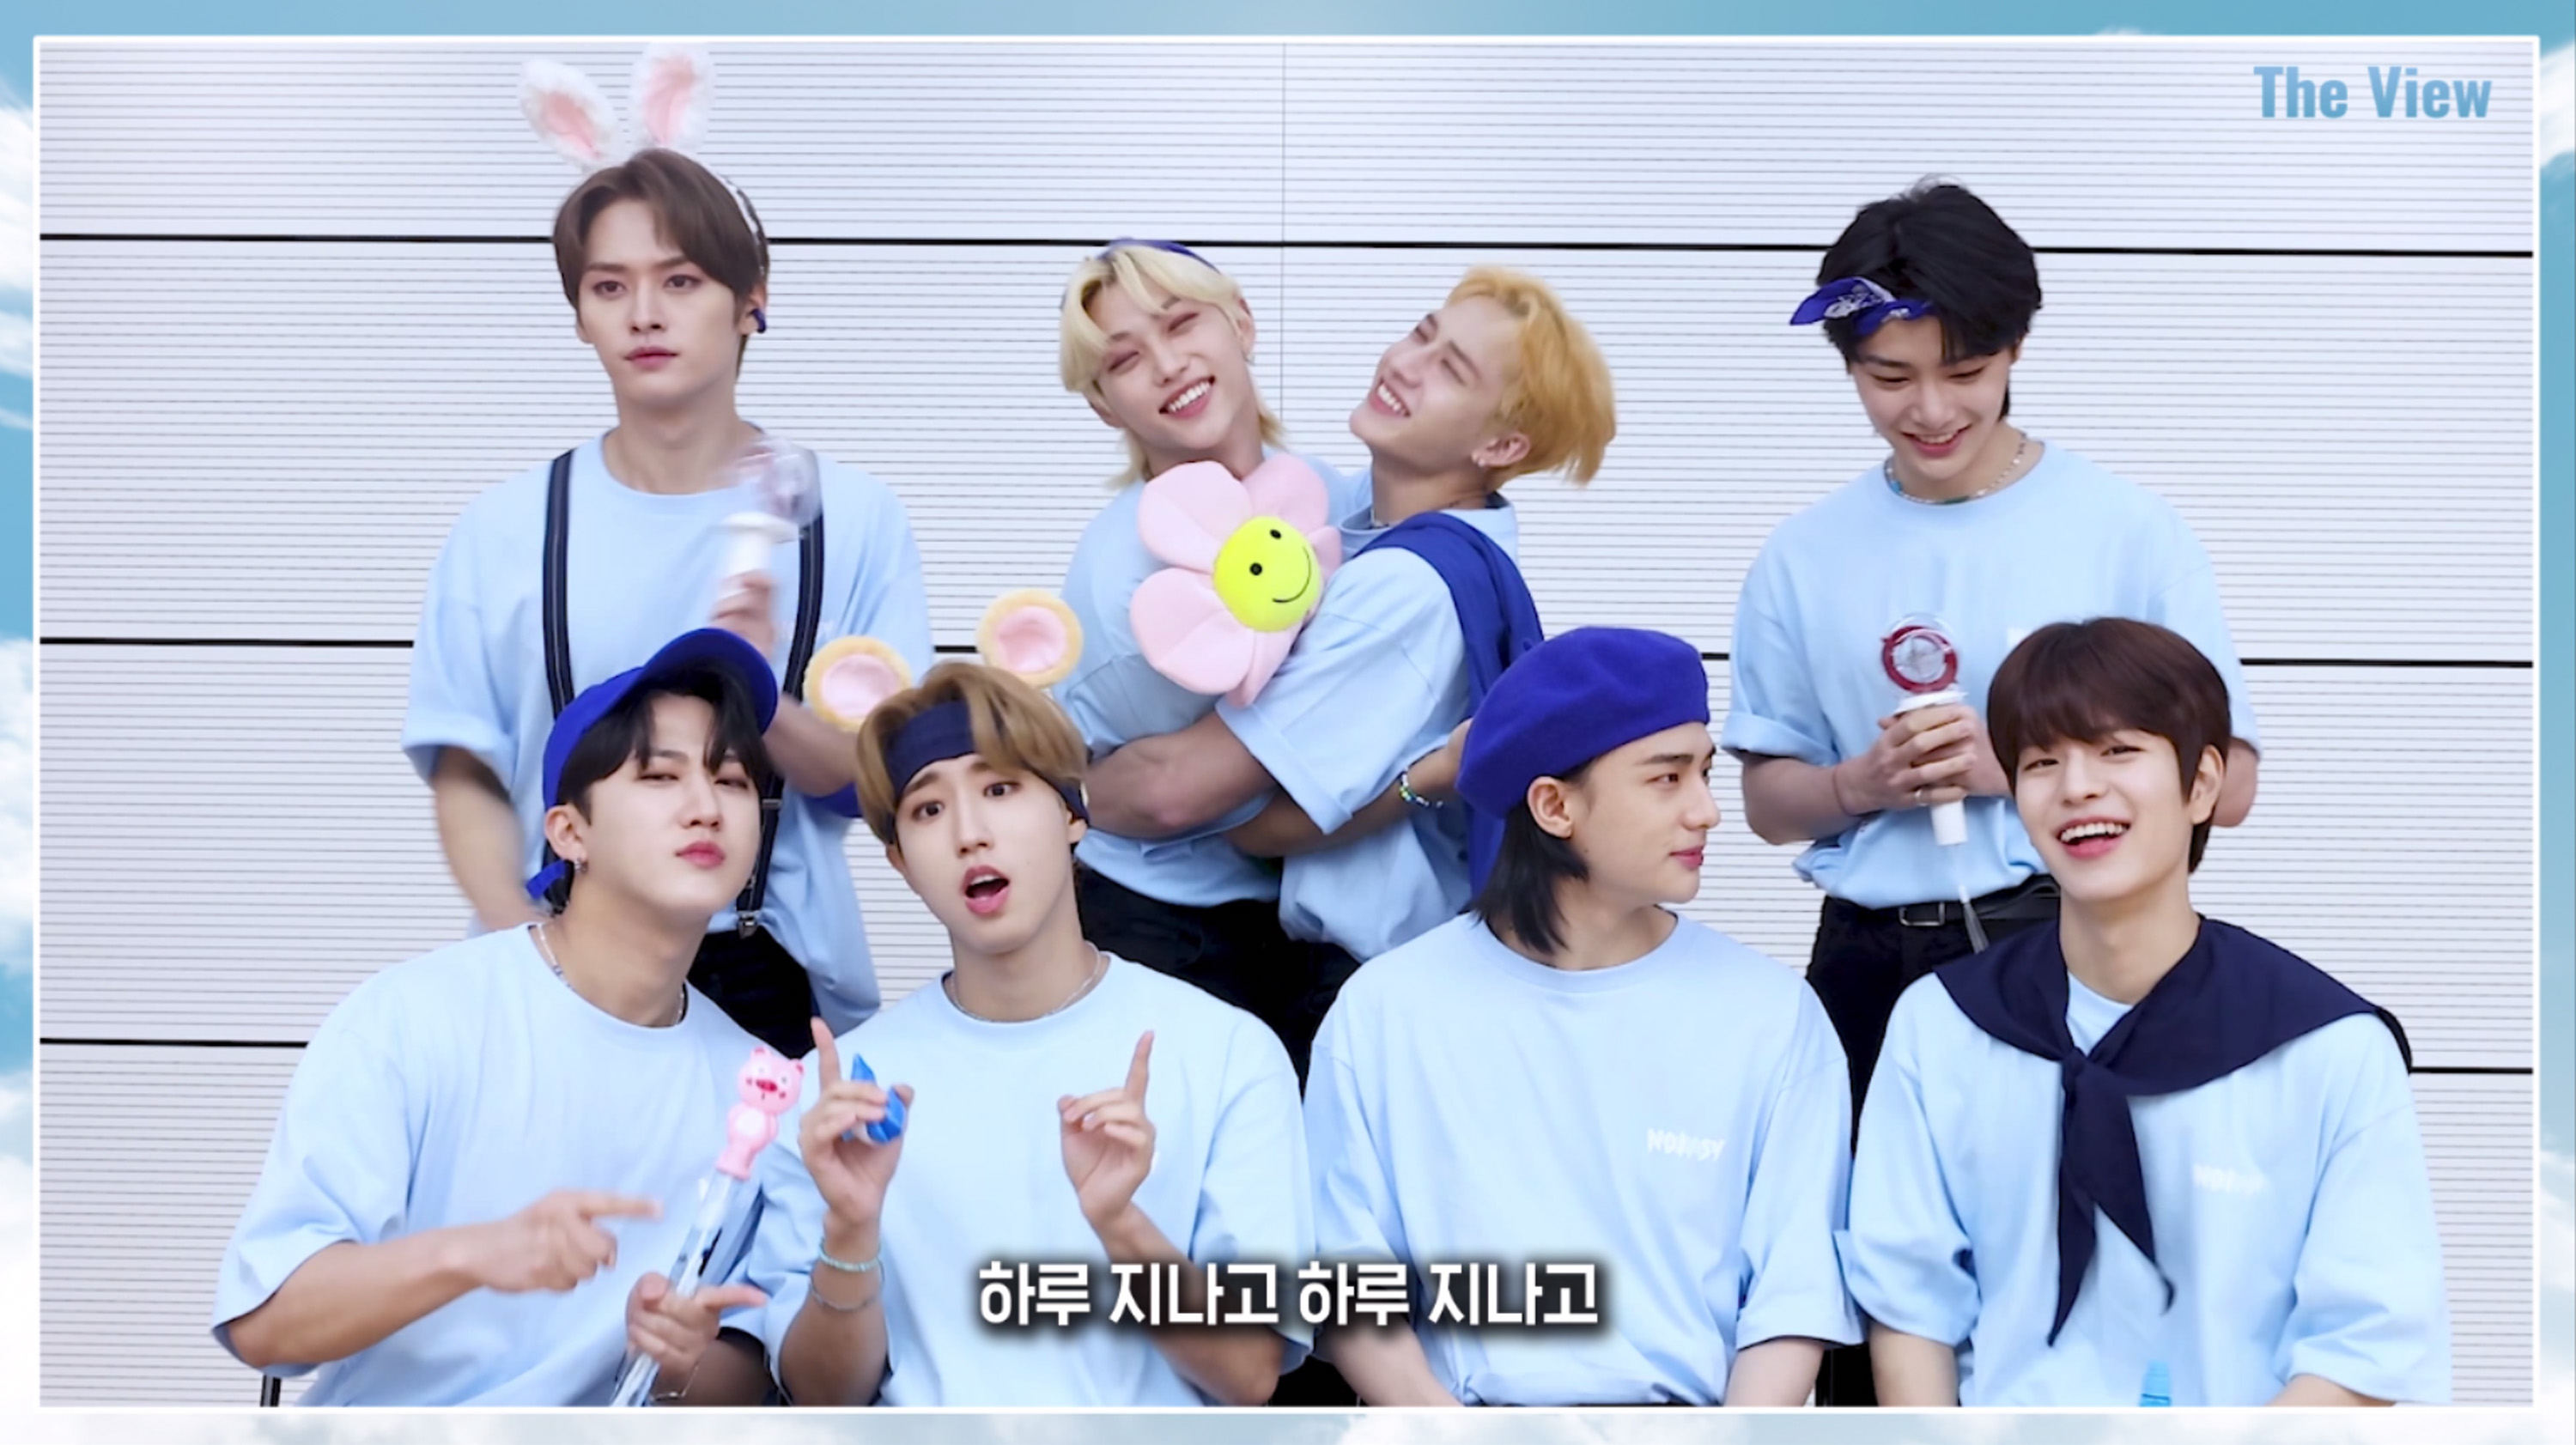 Stray Kids(스트레이 키즈) "The View" (Feat. STAY) Guide Video